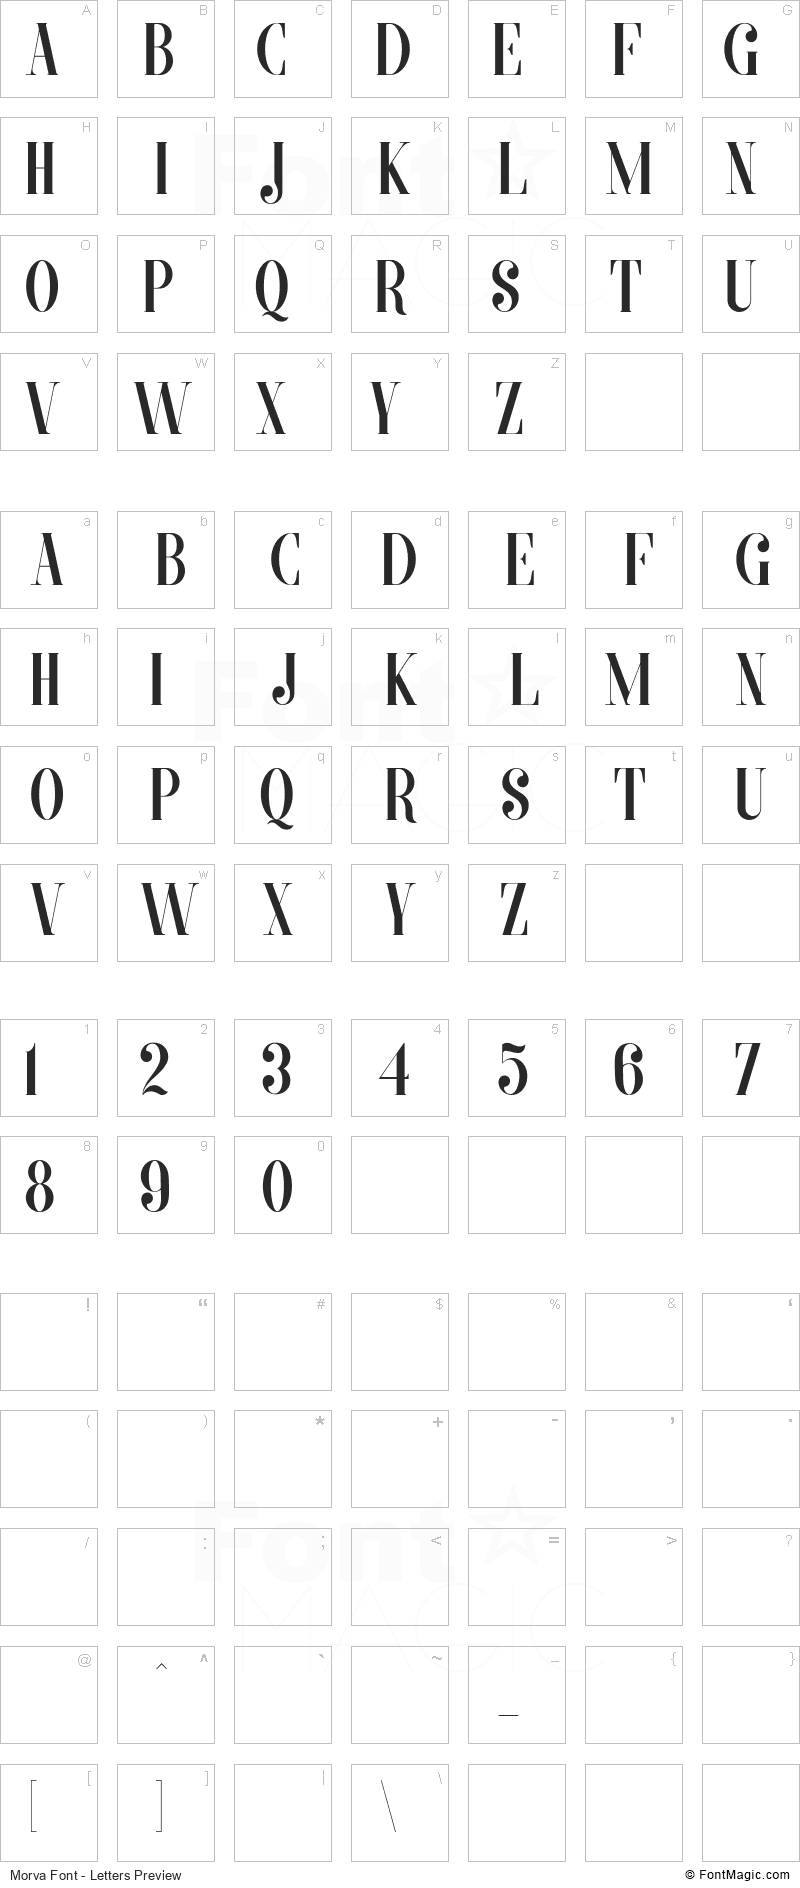 Morva Font - All Latters Preview Chart